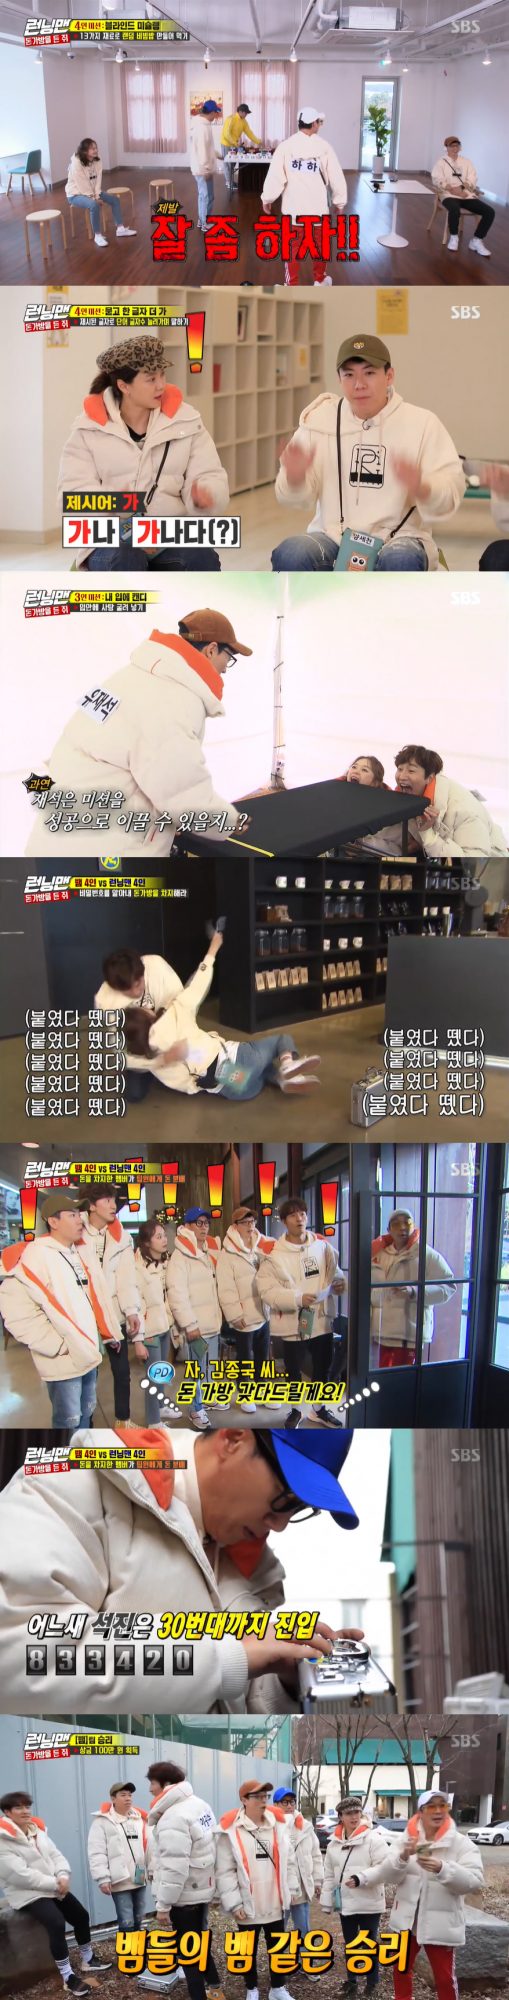 Haha, who won the Money bag at SBS Running Man, shared the prize money with the members and the production team, creating a warm atmosphere.On the 26th, Running Man, Money bag rat race was held.Prior to Race, the members talked about the New Years wishes on New Years Day and had time to see Park Sung-joon and Saju.Park Sung-joon, a mechanic, told Ji Suk-jin, It is a year to hold money and honor. It is good to work as soon as physical strength allows.There may be more overseas activities or local activities, he said.This year and next year are lucky years, and if you miss this time, you will be lucky at 64 and 65, he said. You have a strong desire for money and a little desire for honor, but if you do not get embarrassed, you will go to money.Next, Haha saw the owner. Park Sung-joon, a commentator, said, Mr. Hahas era is held for five years from 2020.It is a luck running toward the peak, he said, making Haha thrilled.Mr. Haha should give luck to Mr. Yoo Jae-Suk, he said. We need to help you because you are the Princess and the Matchmaker who takes away the energy of Yoo Jae-Suk.Jeon So-min had been asking questions before he sat down.Park Sung-joon, a translator, surprised Jeon So-min by saying, The young man can meet his natural life as he joins his husbands position.I think it will come after the start of the year, said Park Sung-joon, an introvert. My husband has a kite with someone who is old and old and has no kite, he said.So, when I saw Jeon So-min and love line Yang Se-chan, the members were sad.However, Park Sung-joon, a commentator, said, There is a good person here in The Princess and the Matchmaker.Park Sung-joon introvert laughed when he said Jeon So-min and Yang Se-chan The Fucking Princess and the Matchmaker.If you stick like a shit and dont lose your relationship and marriage, you dont get divorced. Yang Se-chan has the same kind of cute, loving pathetic pathetic aspect.Im a pity, but Im a little underrated, he explained, but Yang Se-chan has no money and no women.The ratchet, Yoo Jae-Suk, became the first owner of Money Bag, which cost one million won.You need to find out the five-digit password to open the Money bag, and the rest of the members can take the Money bag if they steal the Money bag or tear the bag owners name tag.Among the members, the Snake, which hid its identity, was hiding.Former Game Yang Se-chan and Kim Jong-kook were revealed to be Running Man and Ji Suk-jin was a snake.Yoo Jae-Suk, Lee Kwang-soo, and Kim Jong-kook were the Top Model in the three-person mission, Shim-kim-kim, which captures falling objects with their foreheads.They acquired the first password of the bag, 8, because the snake was not a majority.Yang Se-chan and Song Ji-hyo did the two-man mission Extreme Gugudan Game.The 10th place in the Gugudan problem presented was the game that had to be answered according to the 1 place. The two who boasted Big Chimi eventually failed the mission.Ji Suk-jin, Jeon So-min, Yoo Jae-Suk and Haha followed the top model on the four-person mission Blind Michelin.It was a game that made random bibimbap with 13 ingredients. One in four randomly picked out 13 ingredients without looking at 13 ingredients.The first bibimbap was so strong that it failed to eat because it tasted so strong. Four people tricked it into making delicious bibimbap.But three of them were snakes, so they failed to get a hint. Ji Suk-jin, who noticed that Hahas identity was a snake, formed a coalition.The four-person mission, Abstract One more letter, was Top Model by Song Ji-hyo, Yang Se-chan, Lee Kwang-soo and Kim Jong-kook.Lee Kwang-soo and Song Ji-hyo were suspected of being snakes for making a series of ridiculous mistakes.Jeon So-min, Lee Kwang-soo, and Yoo Jae-Suk rolled candy in their mouths and put the top model on the three-person mission Candy in my mouth.At the end of the twists and turns, the three men succeeded in the mission, and because the number of snakes was less than half the number, they got the second digit of the password, 3.Song Ji-hyos identity, which was revealed to viewers, was snake, and Lee Kwang-soos identity was Running Man.But the identity of Yoo Jae-Suk and Jeon So-min was unclear.Jeon So-min called Lee Kwang-soo and strongly claimed he was Running Man, suggesting Mission Top Model and Lee Kwang-soo went to the mission site.But Jeon So-min took the Money bag by ripping off the name tag of the outerwear while Lee Kwang-soo was away for a while.Then the two men fought a Money bag fight, ripping and ripping off the Name tag; the Money bag was eventually taken back by Lee Kwang-soo.Yoo Jae-Suk, Kim Jong-kook, Ji Suk-jin, Jeon So-min and Lee Kwang-soo succeeded in a five-person mission and learned the fifth place of the password 2.But after Game, I found out that Money bag disappeared.Lee Kwang-soo questioned the members and was suspected of being a member of the group Yoo Jae-Suk took the Money bag, but Yoo Jae-Suk was not the culprit.Haha, who was passing by, was spotted by Kim Jong-kook and ripped off the Name tag.The culprit who took the Money bag was Haha and Kim Jong-kook took the Money bag.The struggle over the Money bag became fierce and in the meantime, Yoo Jae-Suk ran away with the Money bag.Yoo Jae-Suk hid his identity by claiming to Lee Kwang-soo that Jeon So-min was a snake.While Lee Kwang-soo was in turmoil, Yoo Jae-Suk handed Ji Suk-jin a Money bag and got him to run away.Turns out the Money bag disappearance was also a decorating of the snakes Yoo Jae-Suk and Haha.Lee Kwang-soo found Ji Suk-jin who was matching the password and recovered the Money bag.Kim Jong-kook, Yang Se-chan, Lee Kwang-soo and Jeon So-min struggled again to get each others prize money out.In the meantime, the snake Haha extorted the prize money and the snake team won the final.Haha handed out money to the members regardless of the team. The members who received the money gave it back to the production team.Ji Suk-jin was sad, but he laughed at the production team by giving the prize money Please make a reservation.